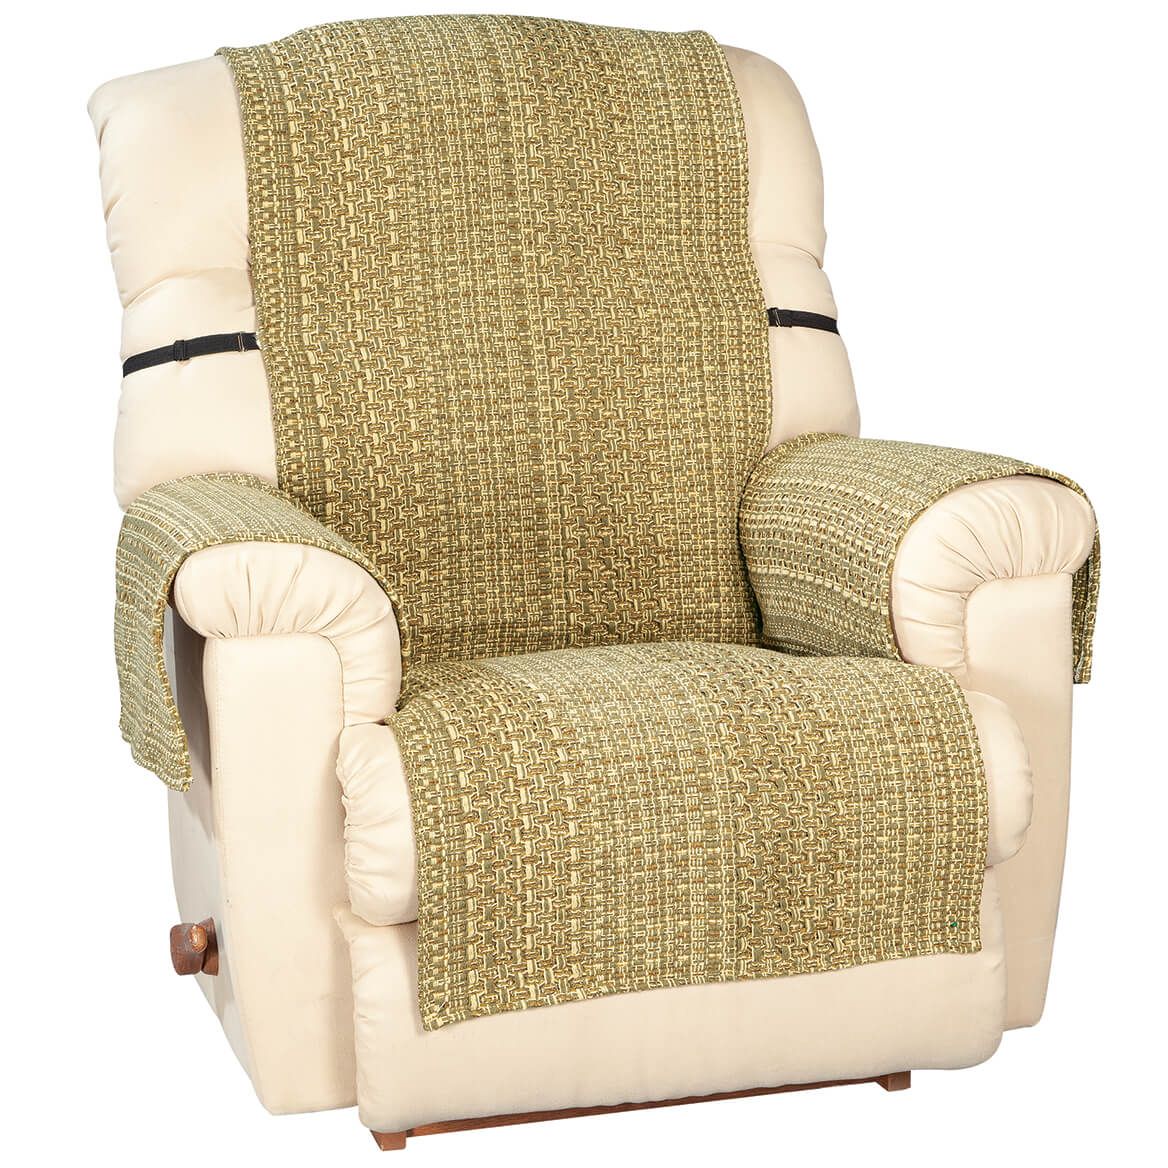 Textured Recliner and Chair Cover by OakRidge™ + '-' + 374300